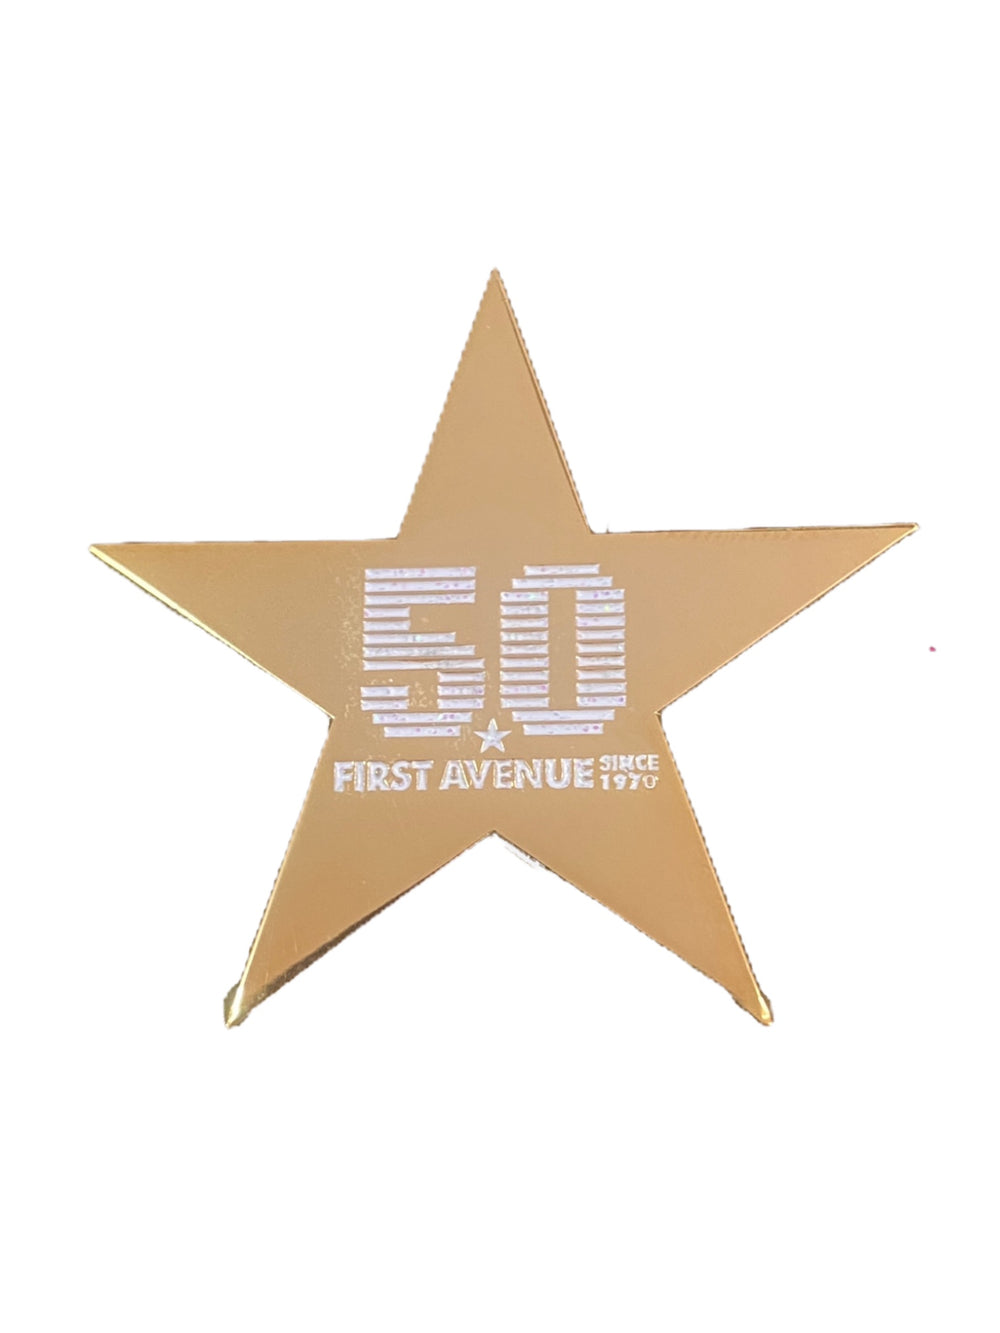 Prince – First Avenue Star 50th Anniversary Official Pin Enamel Badge NEW